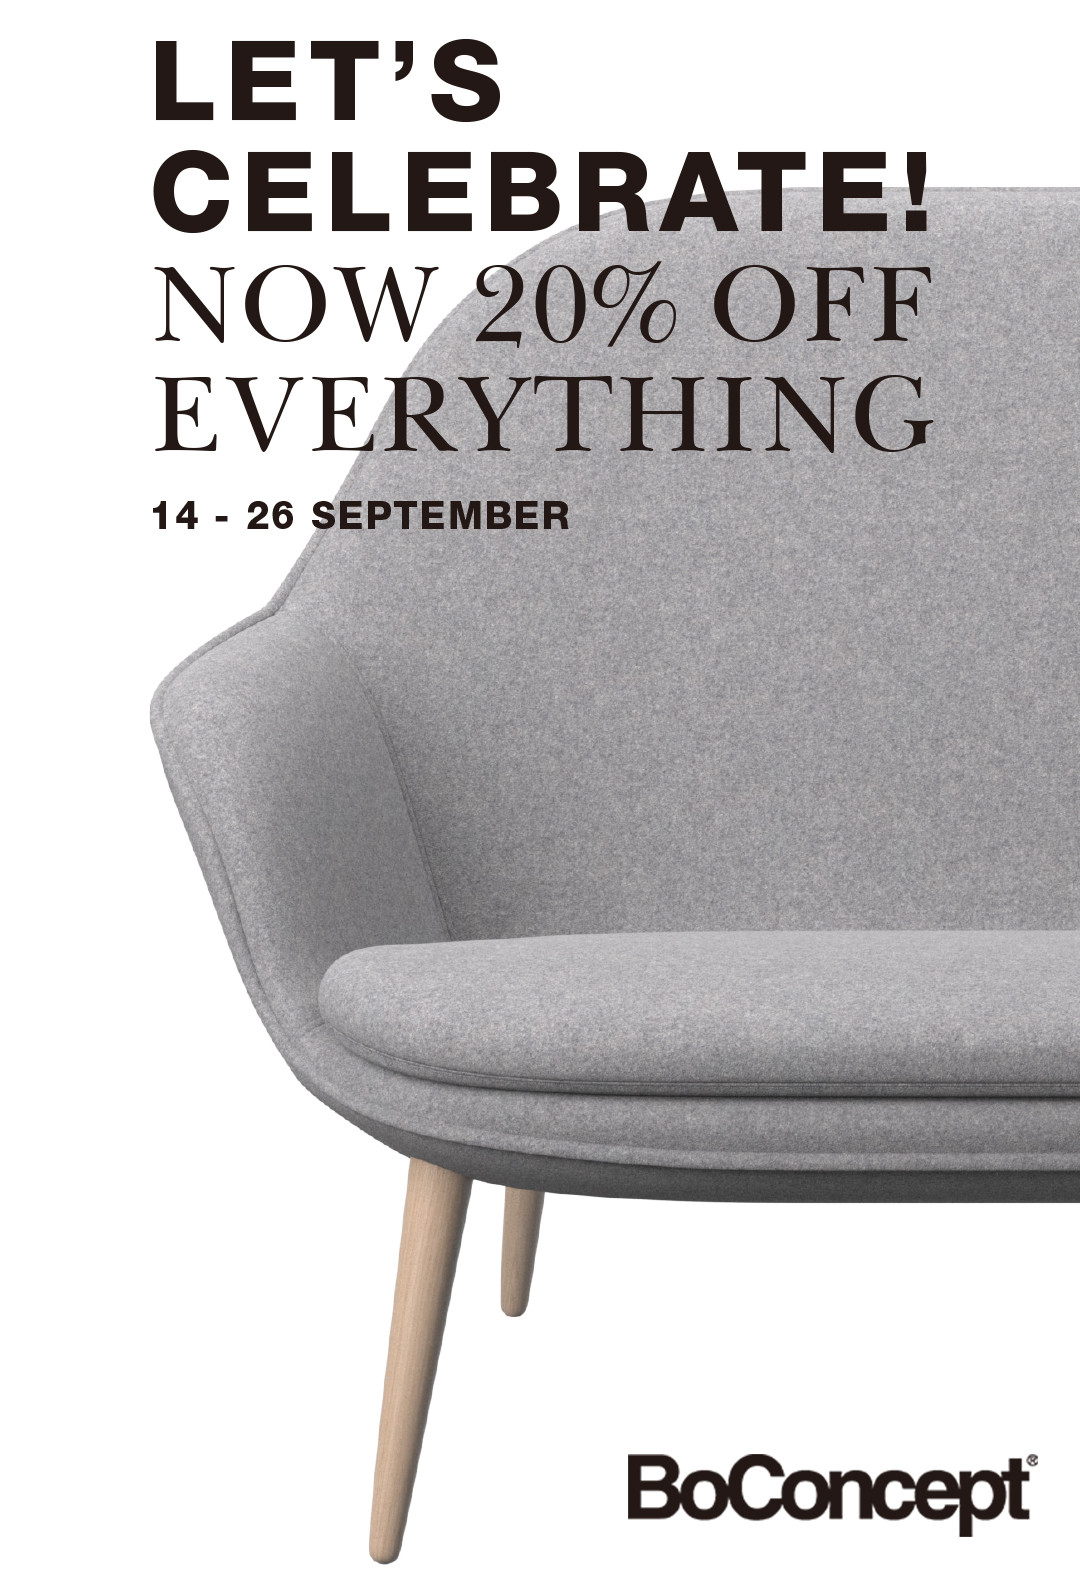 LET'S CELEBRATE! NOW 20% OFF EVERYTHING 14 - 26 SEPTEMBER